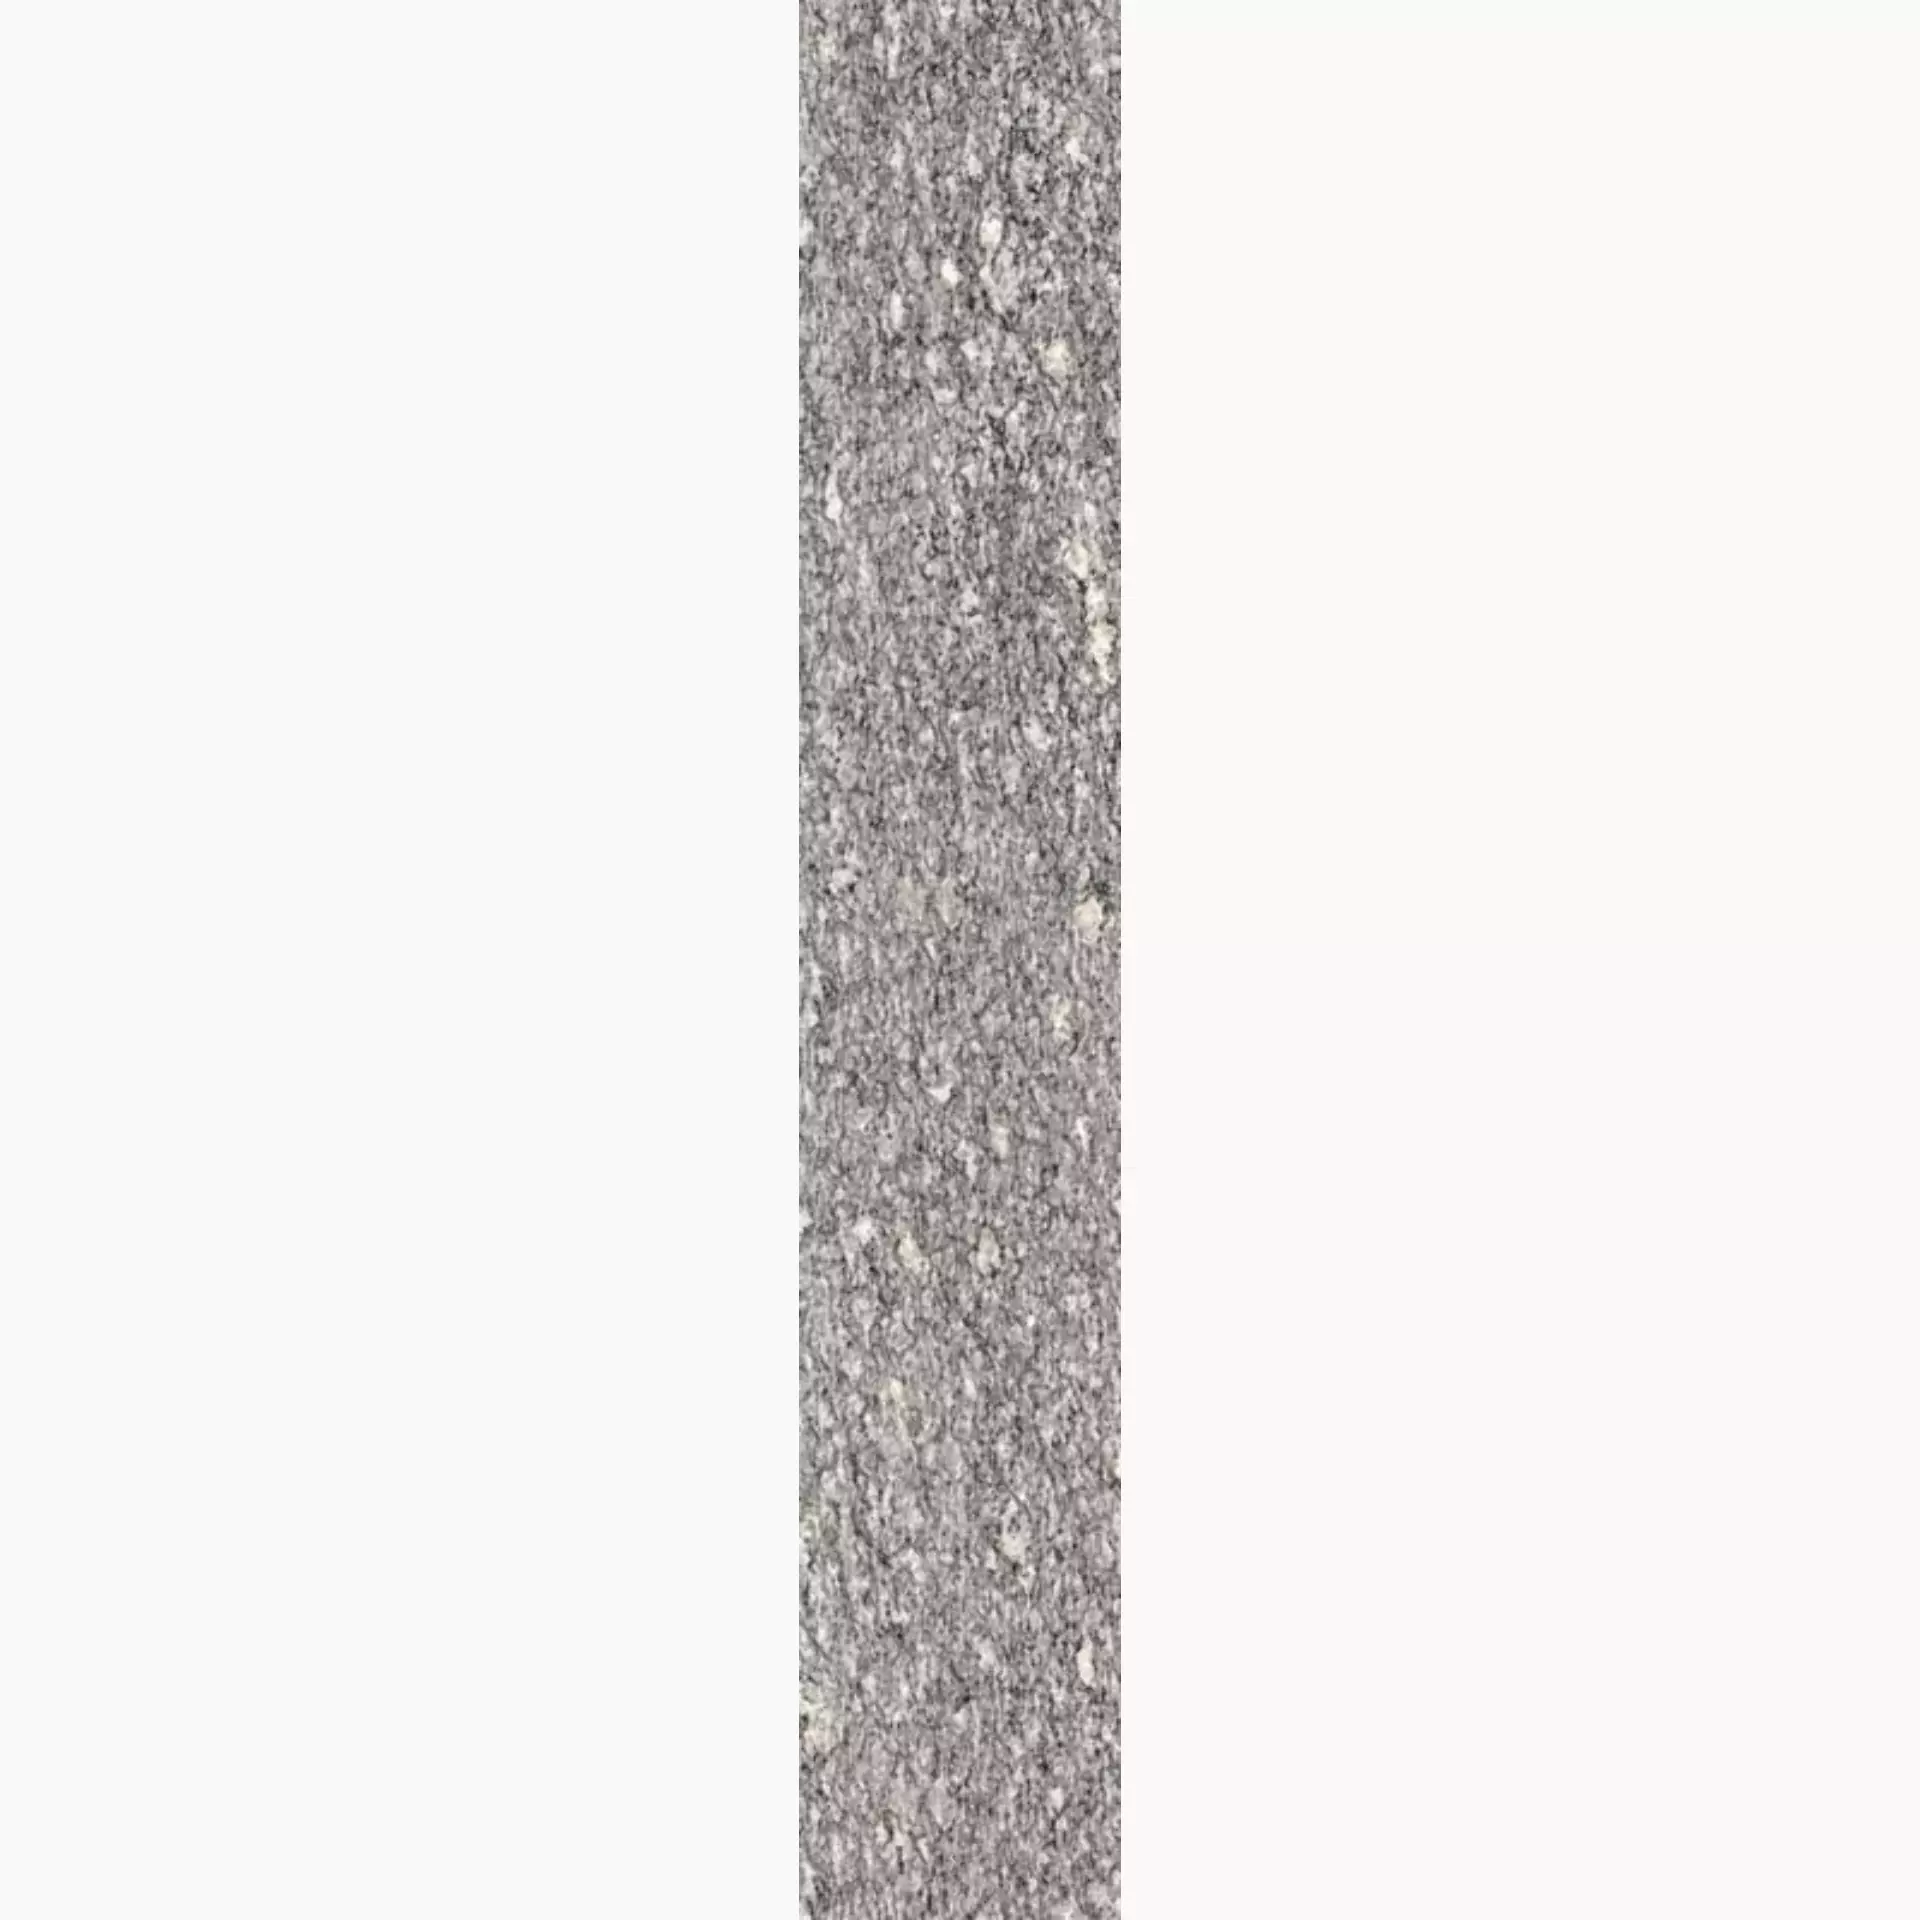 Sant Agostino Unionstone London Grey Natural CSALOGRY10 10x60cm rectified 10mm